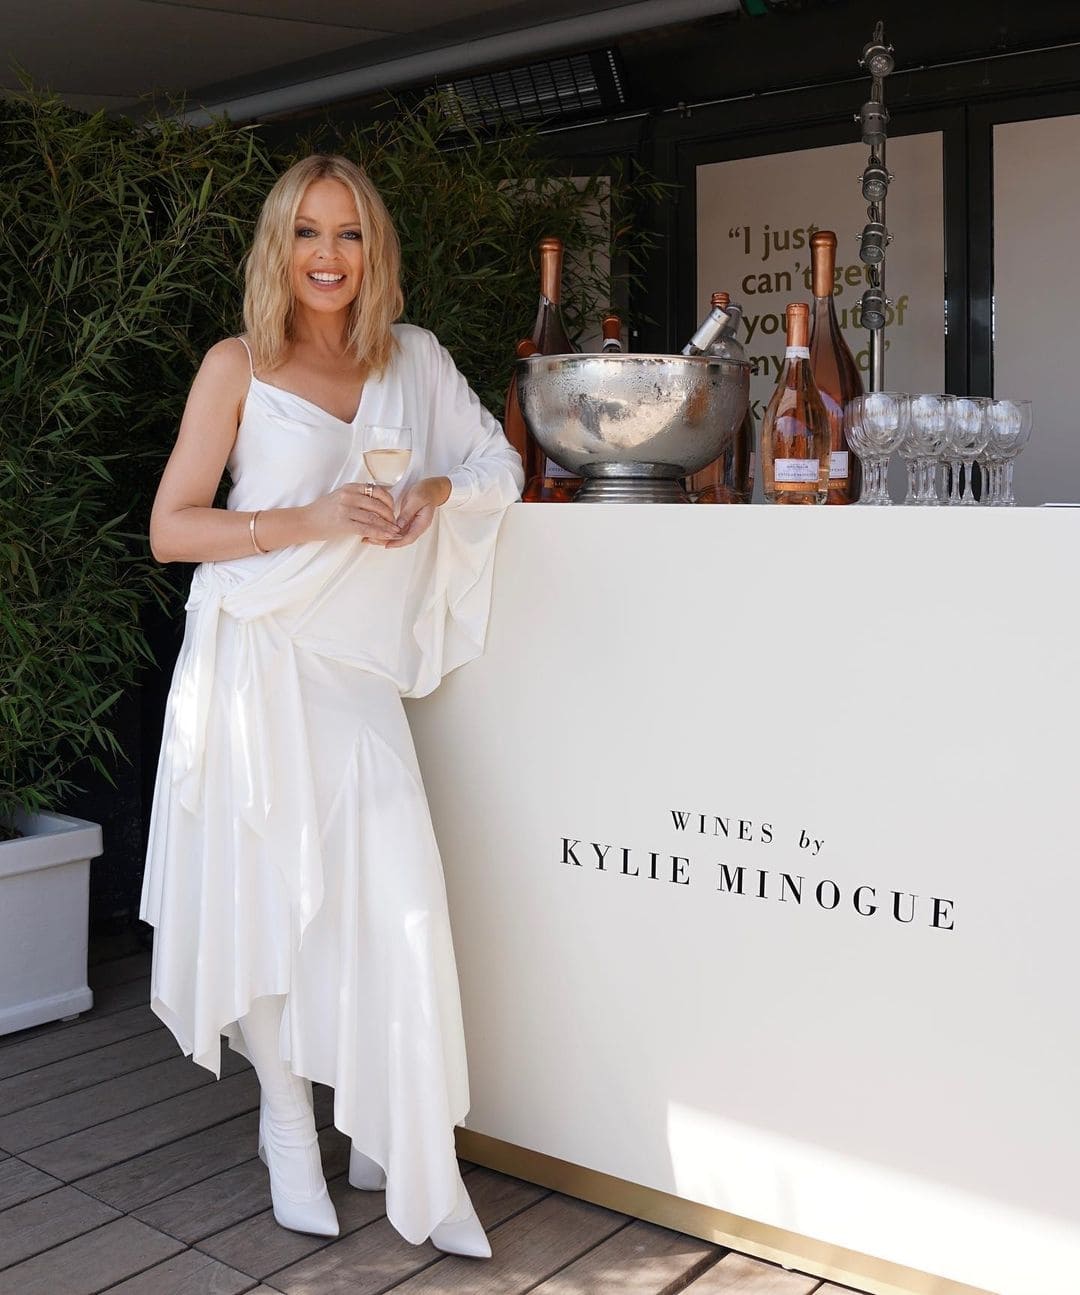 Kylie Minogue has launched a popular range of prestigious wines produced in France, Italy, Australia, and Spain